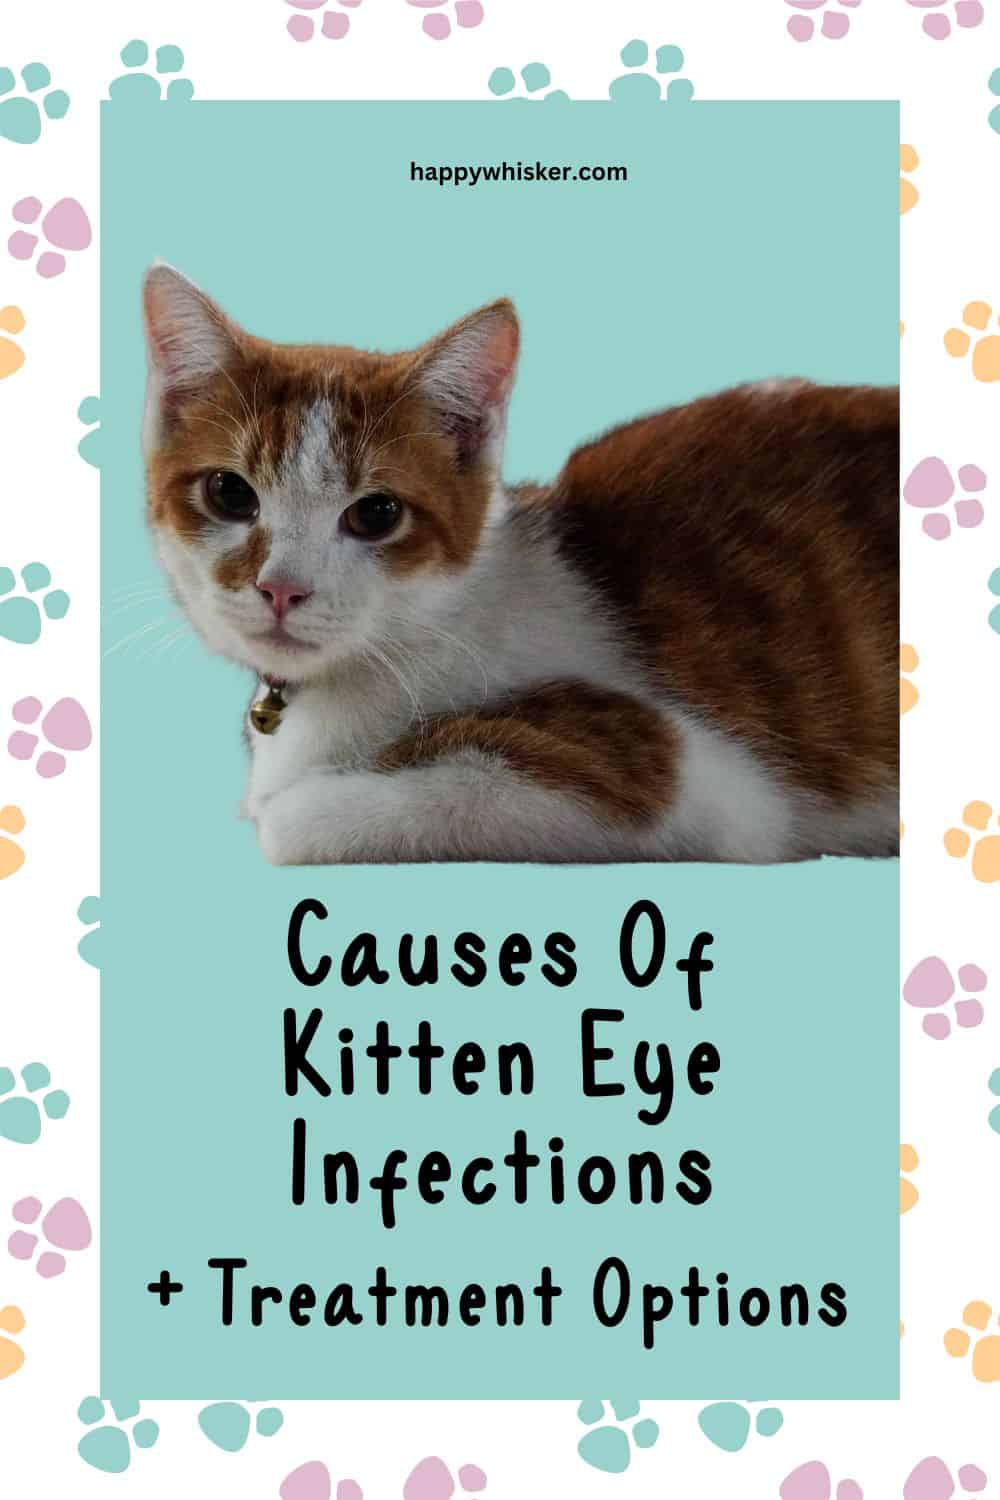 Causes Of Kitten Eye Infections + Treatment Options Pinterest